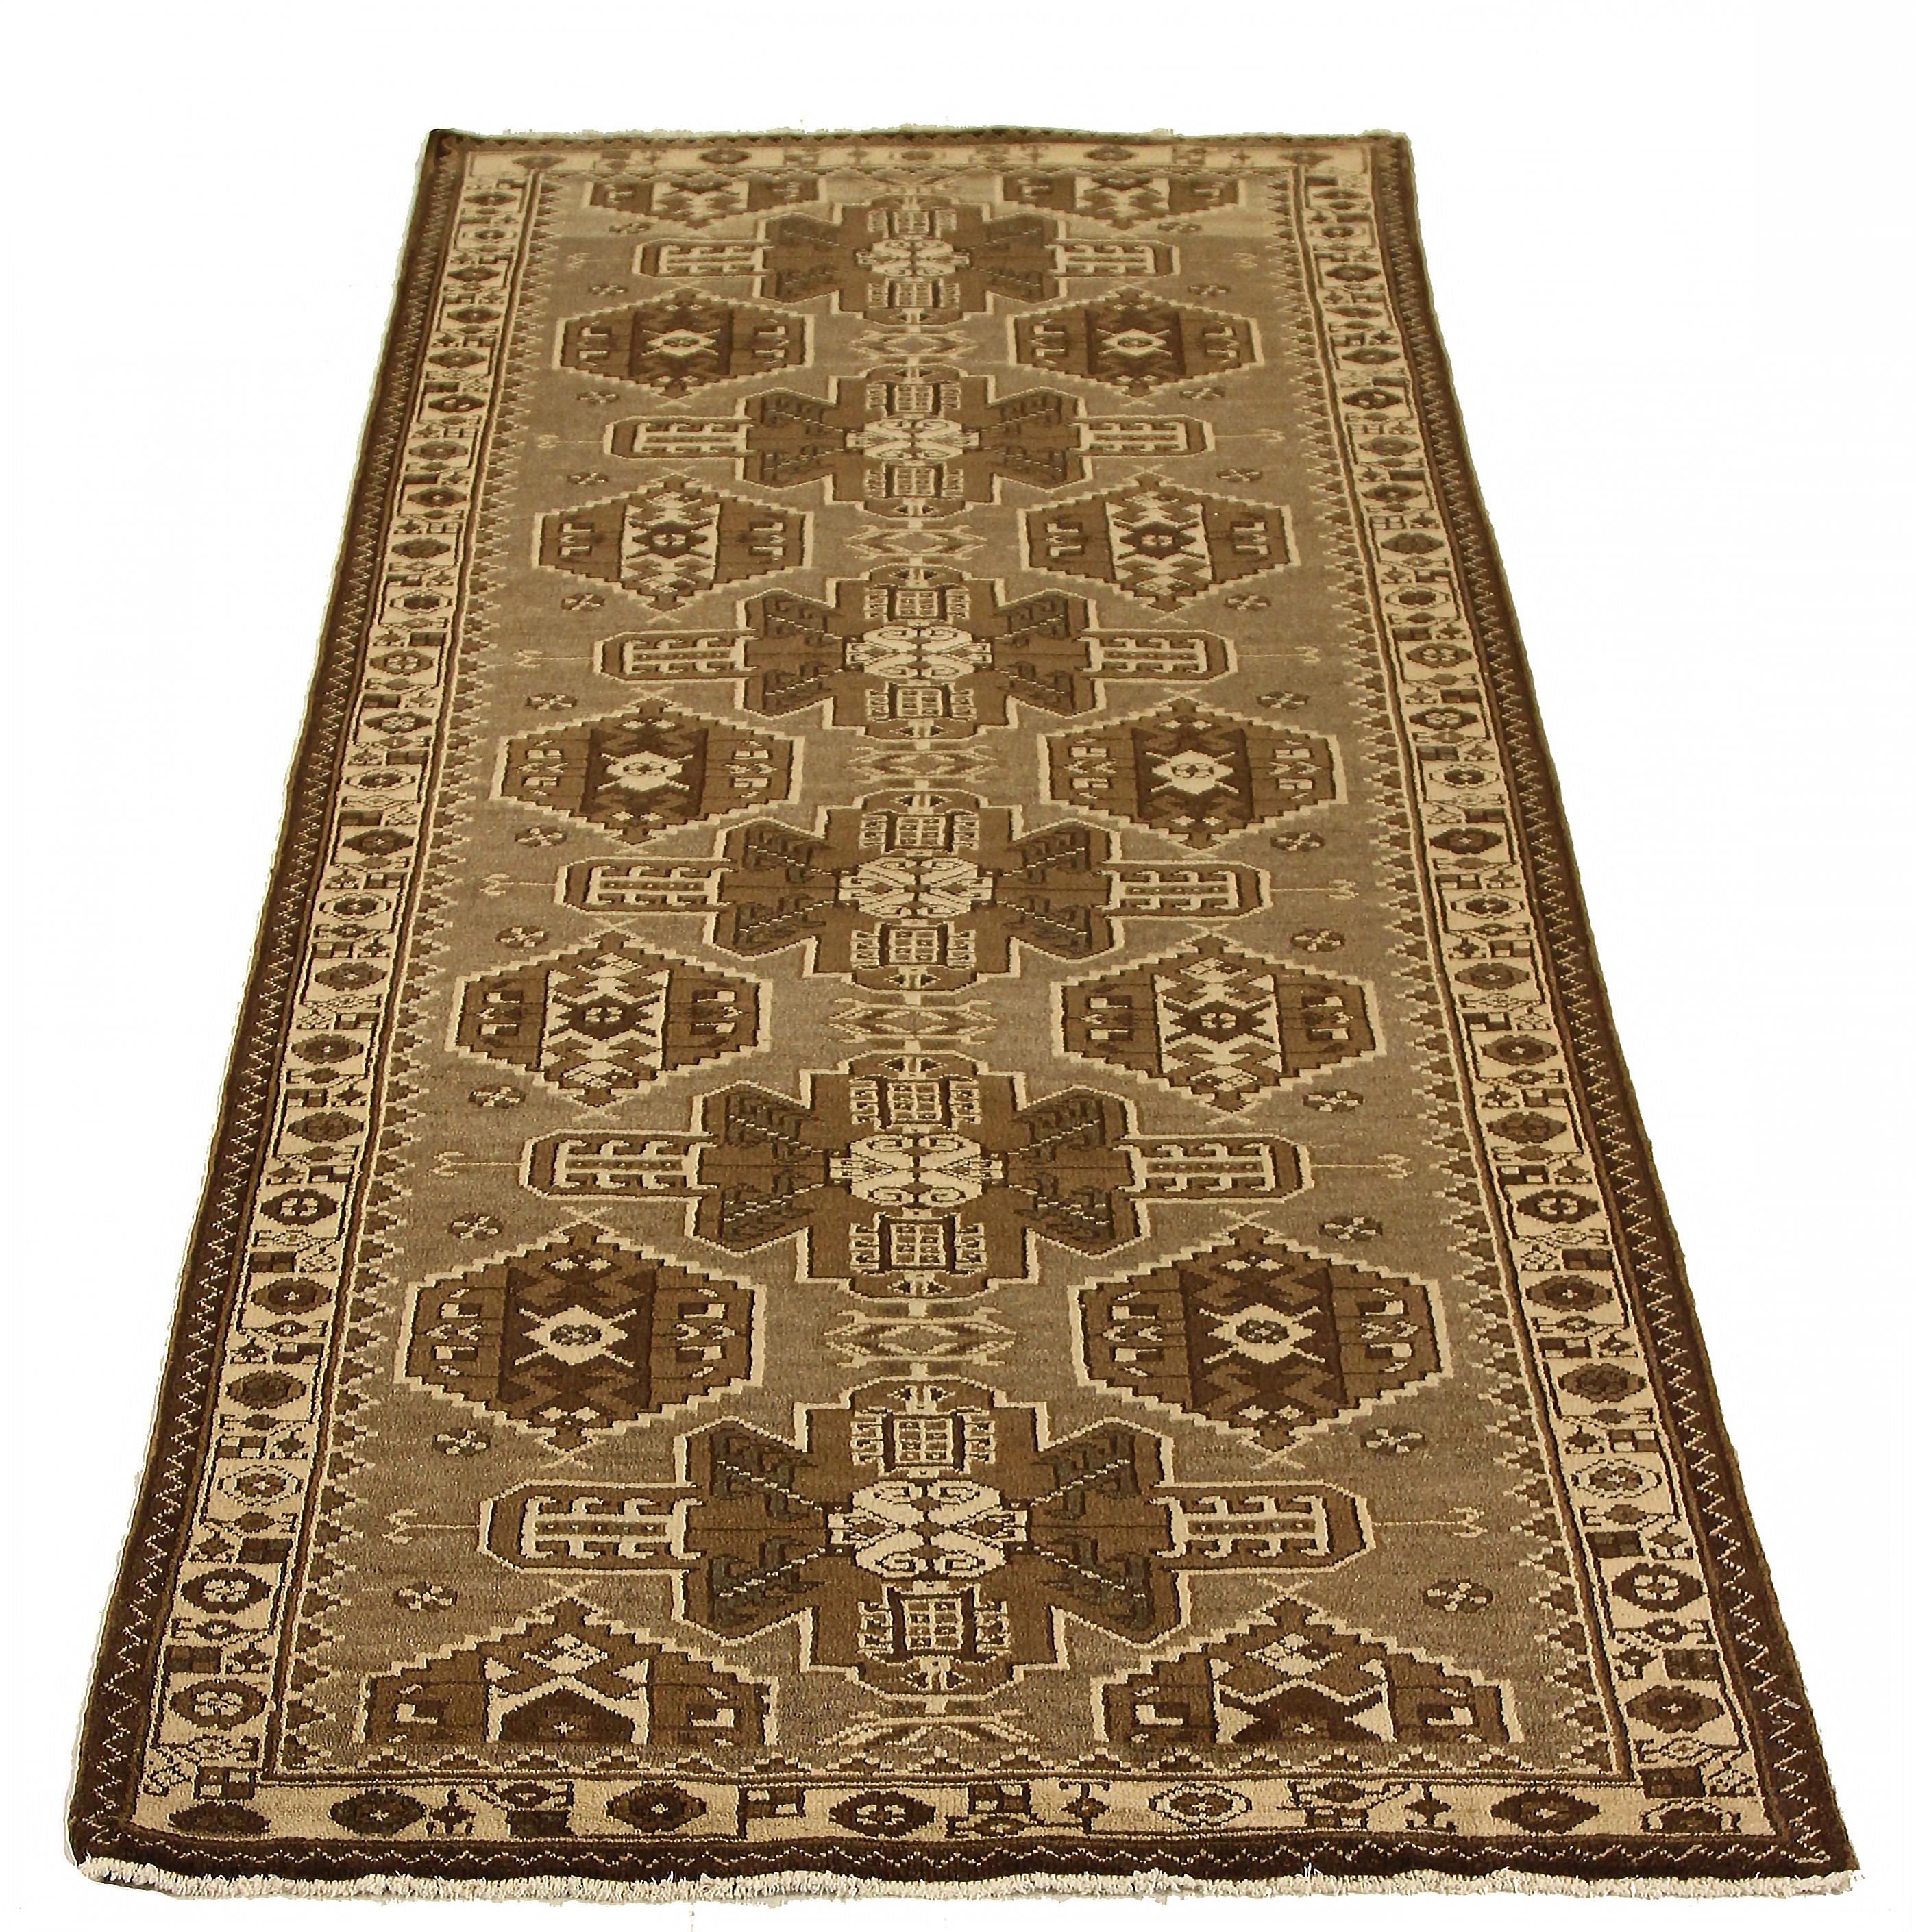 Antique Persian area rug handwoven from the finest sheep’s wool. It’s colored with all-natural vegetable dyes that are safe for humans and pets. It’s a traditional Saveh design featuring botanical details on a beige and brown field. It’s a lovely